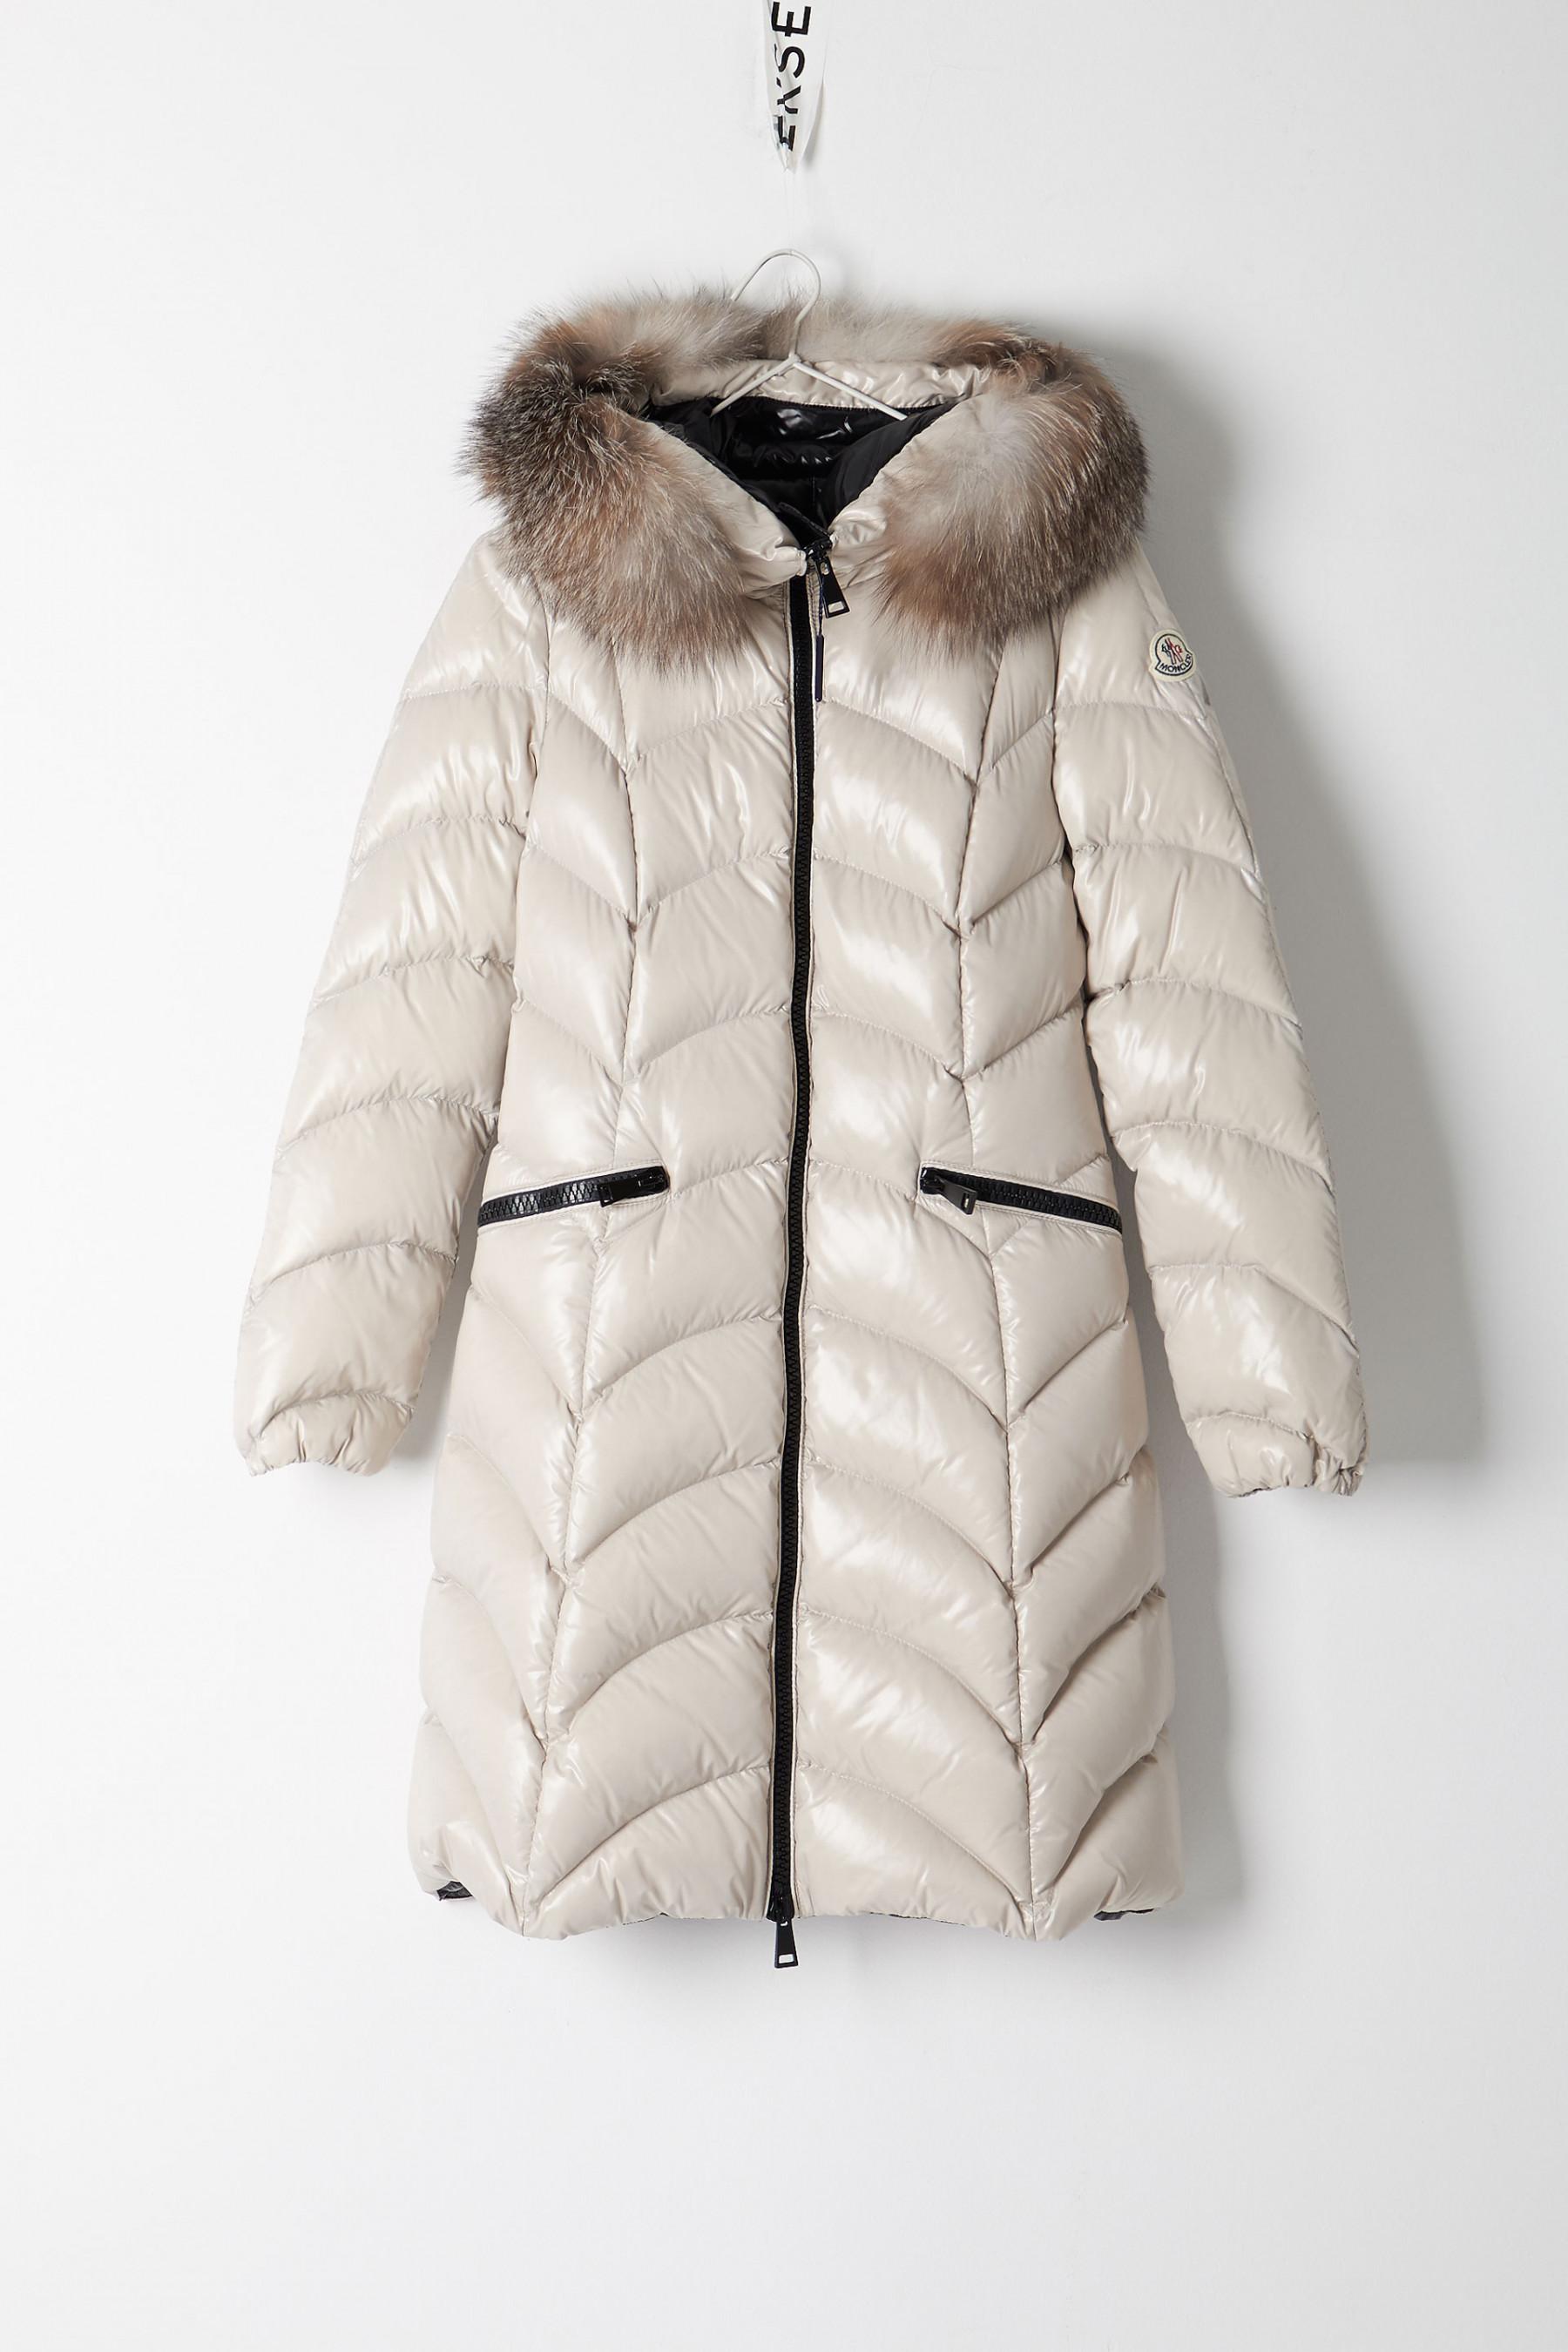 Moncler Synthetic Albizia Coat in Camel (Natural) - Lyst